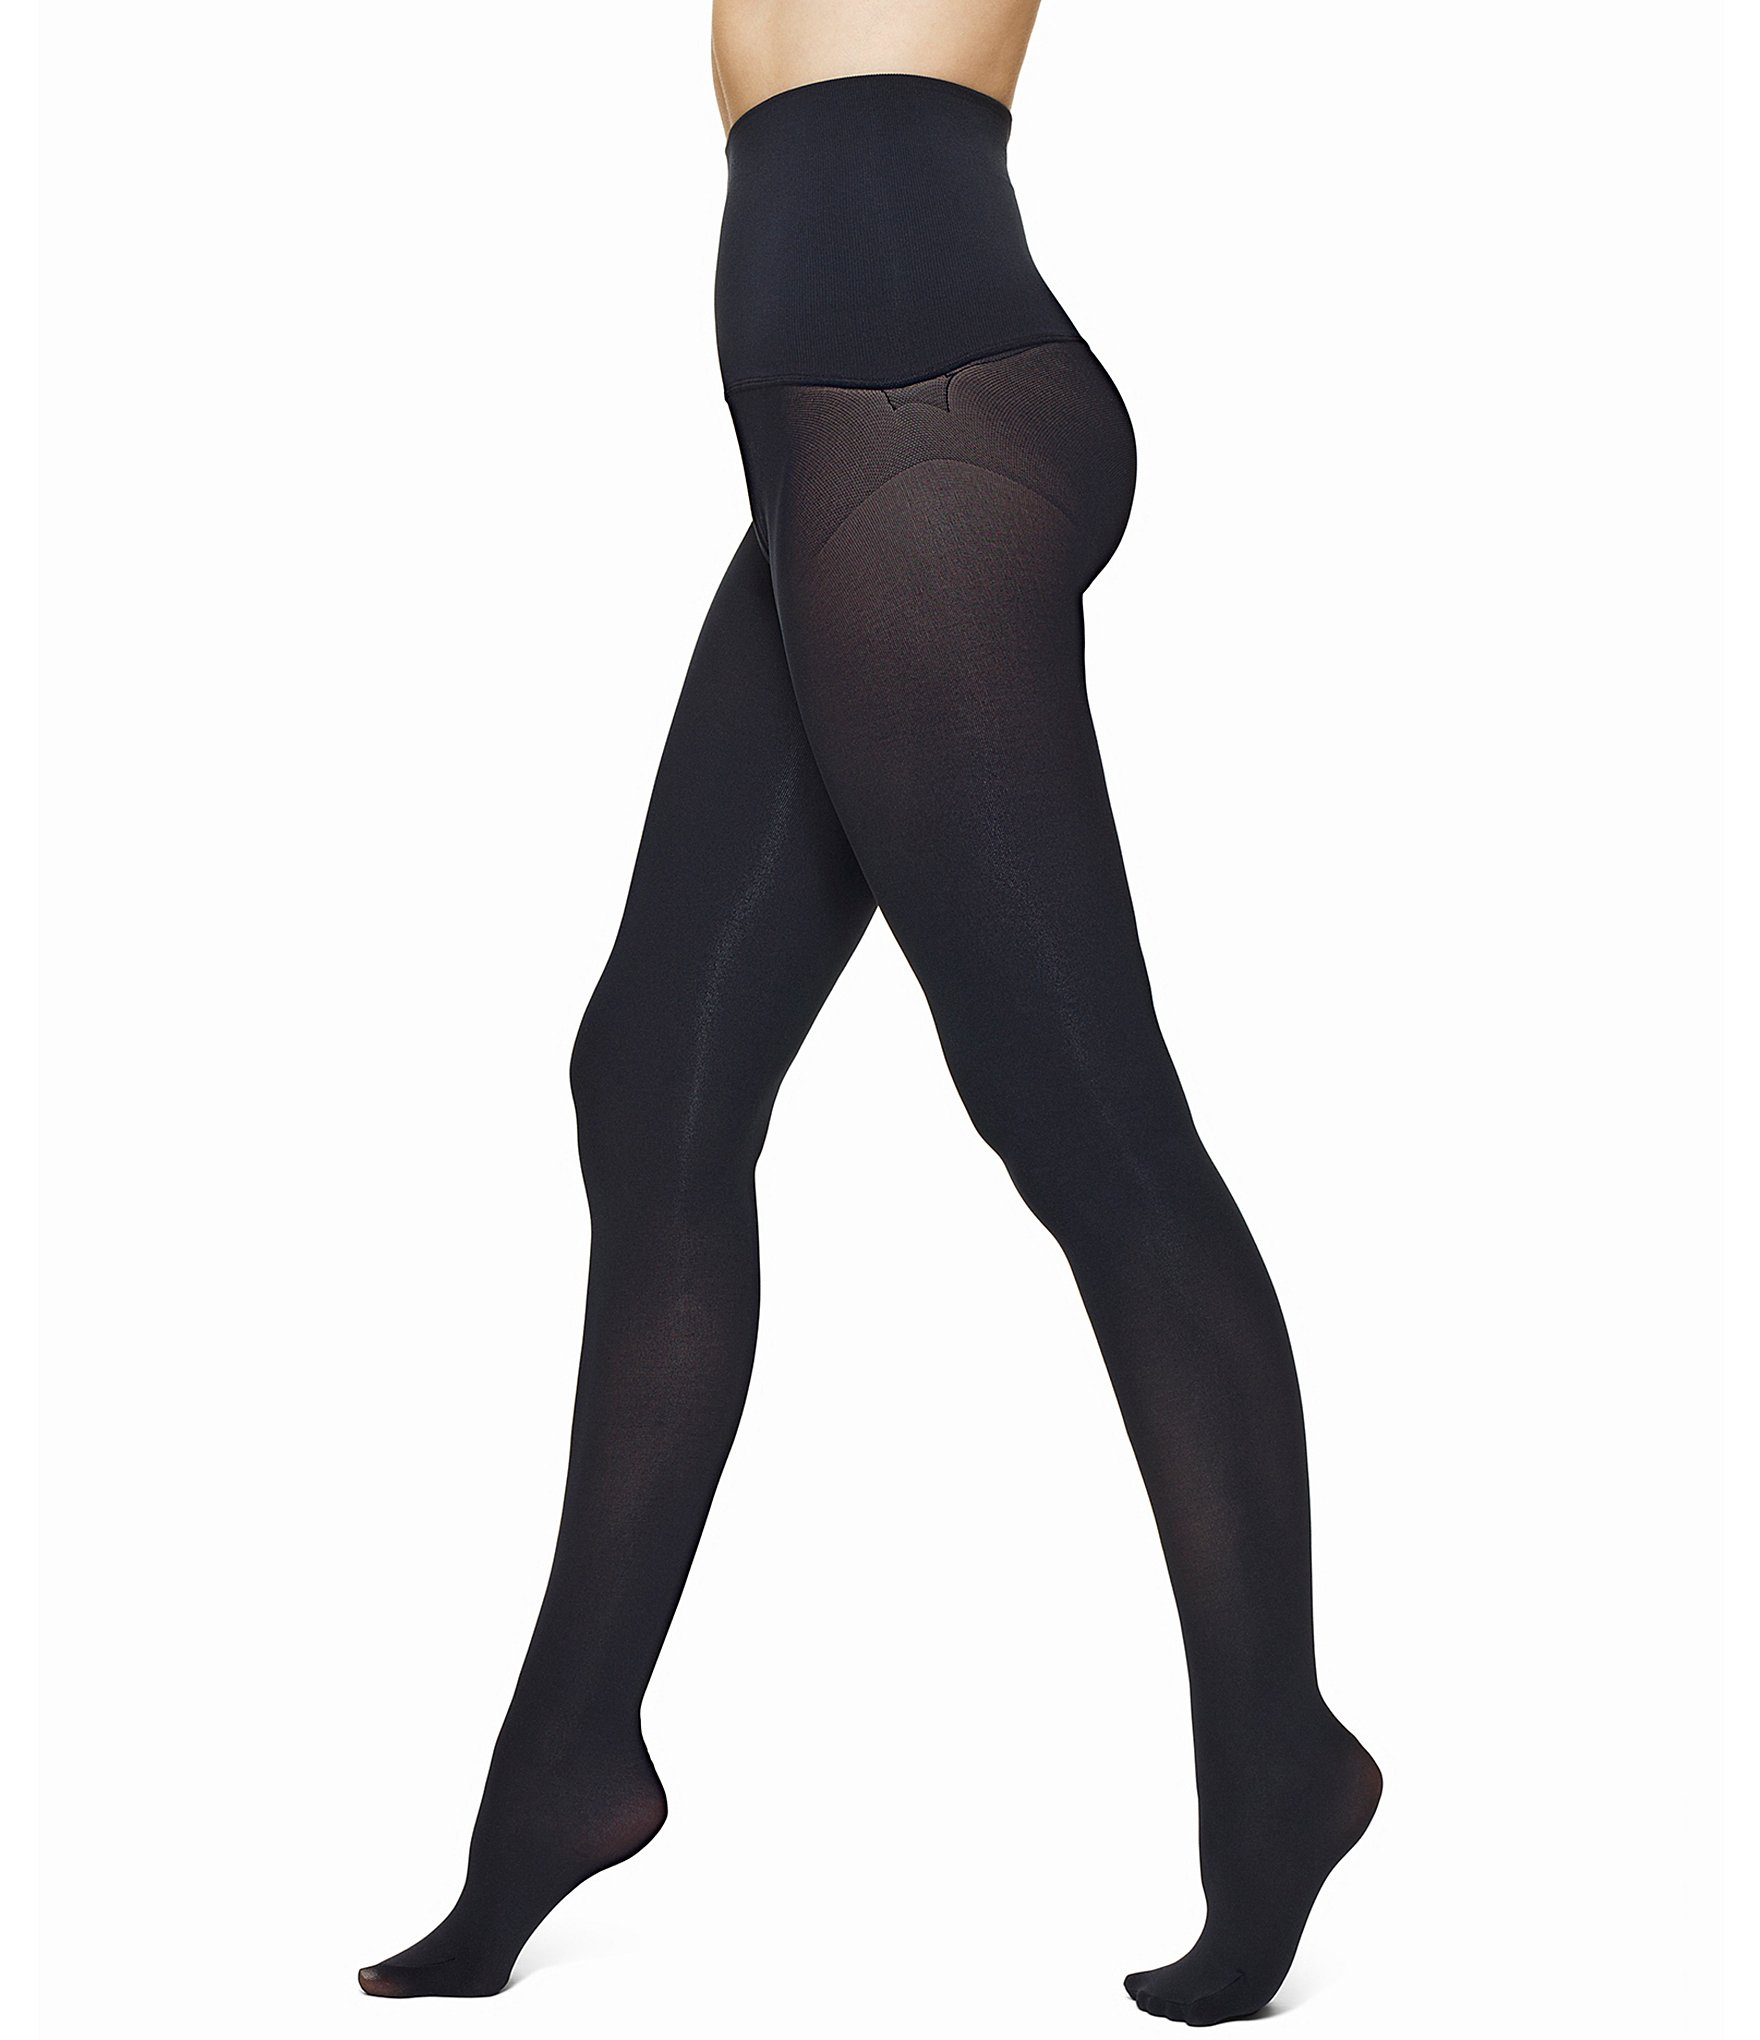  Hipstik Navy Tights for Women, Opaque Tights with Comfort Lace  Top